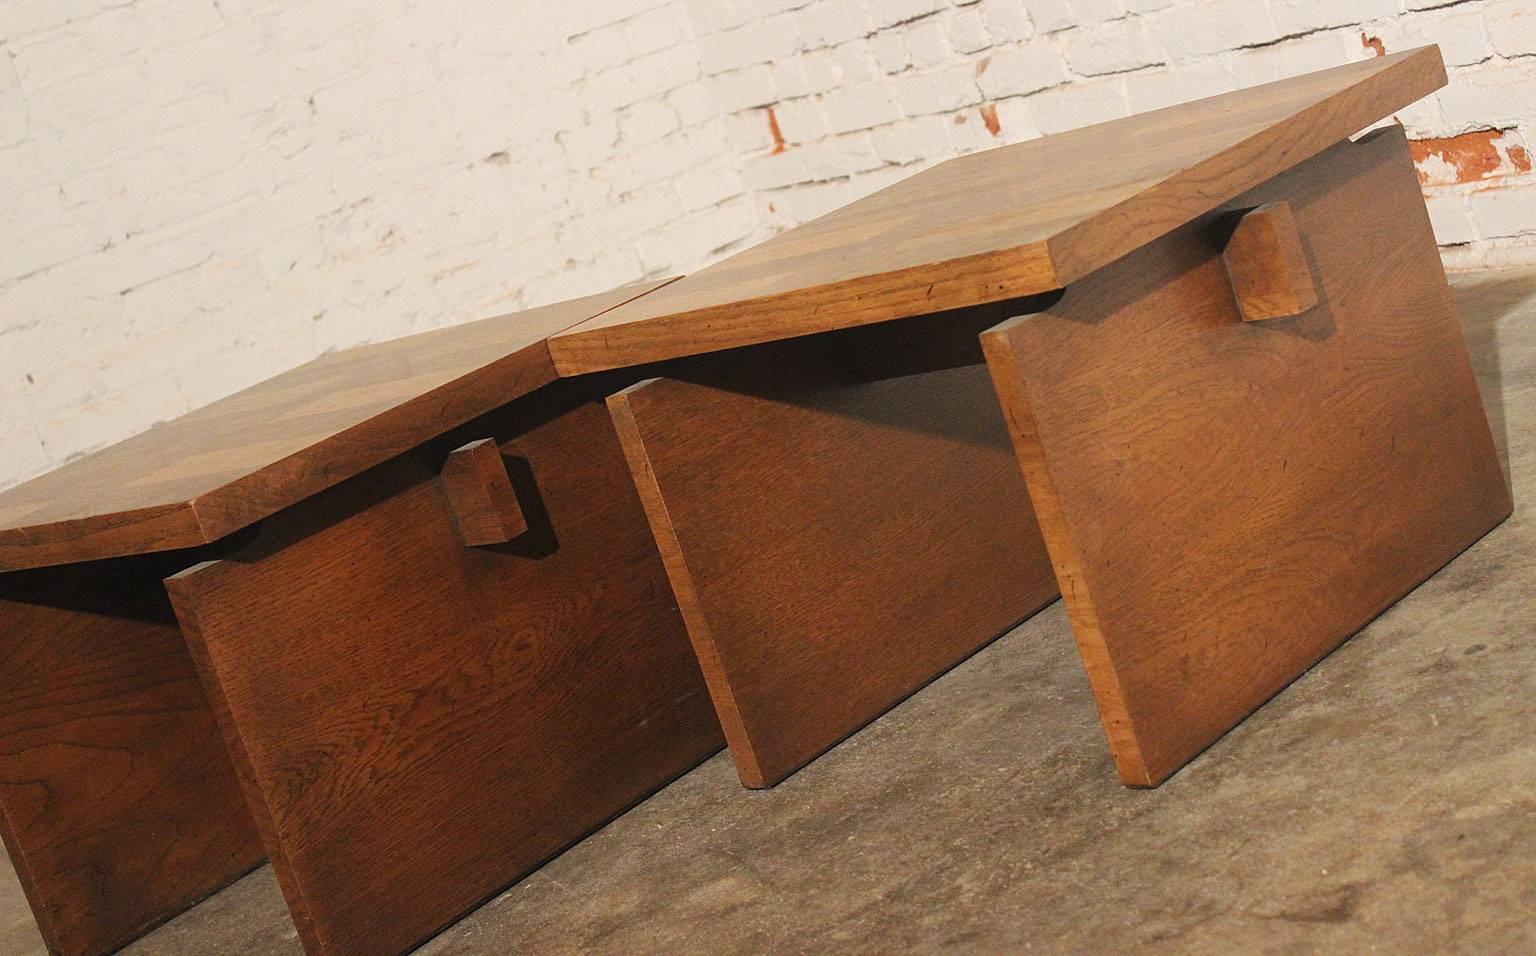 Wonderful pair of vintage postmodern chunky Brutalist end tables in oak by Lane. In very good vintage condition and extremely sturdy. This pair of Lane Furniture small tables would make a striking addition to your home.

Here is a handsome pair of